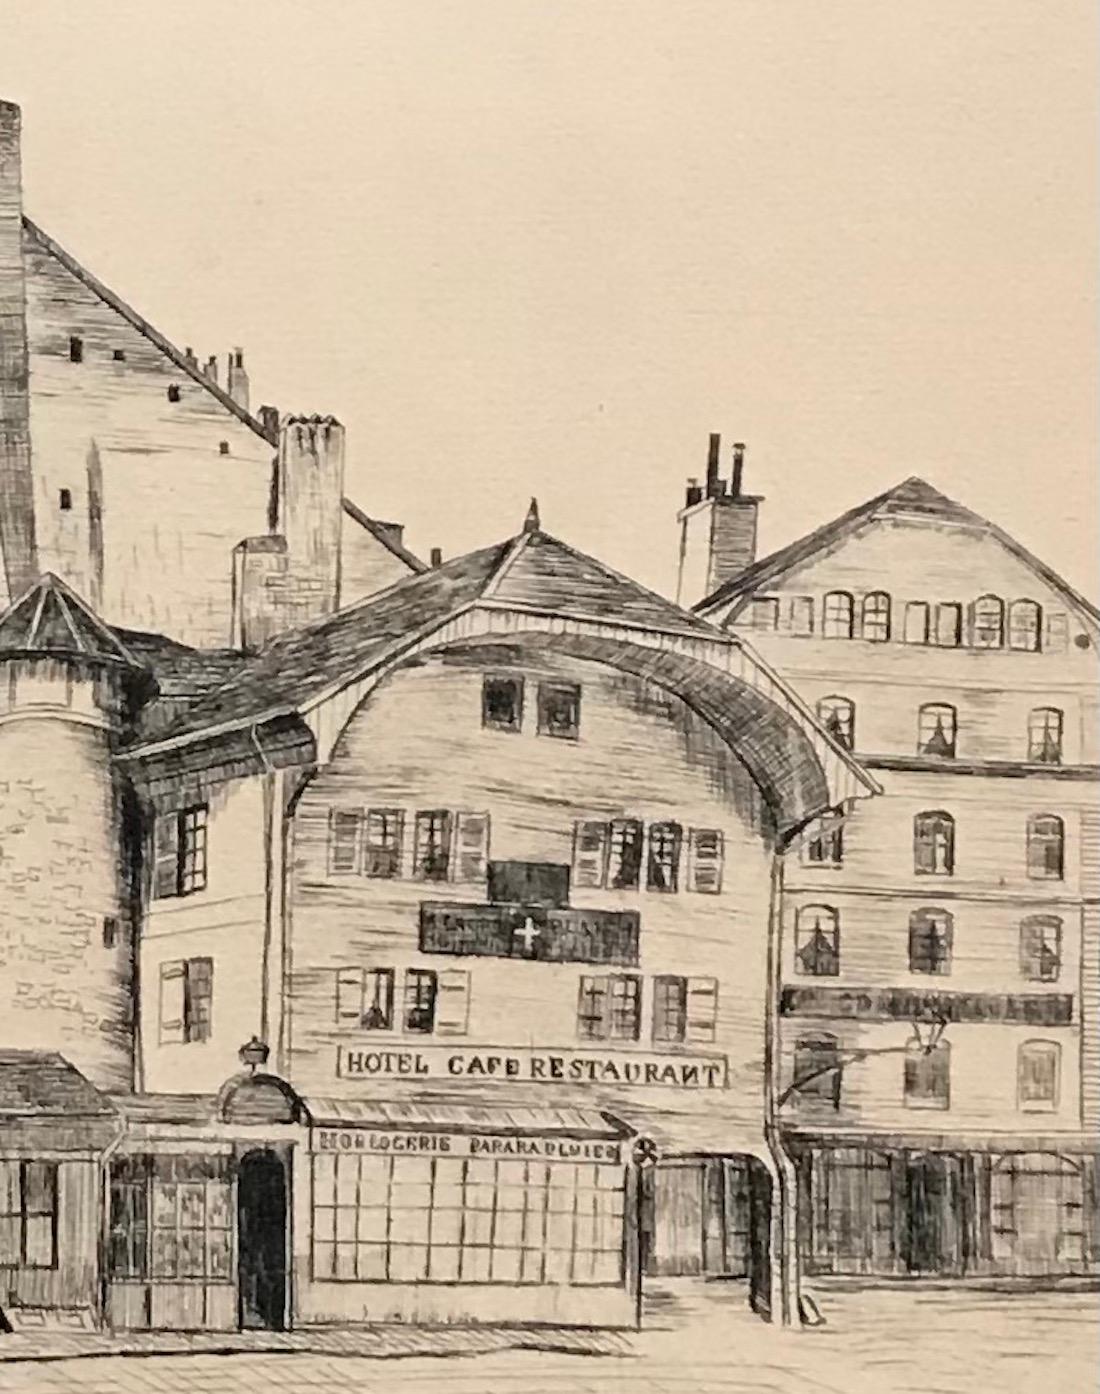 Little Coutance, Geneva by Georges Bastard - Engraving 36x26 cm For Sale 3